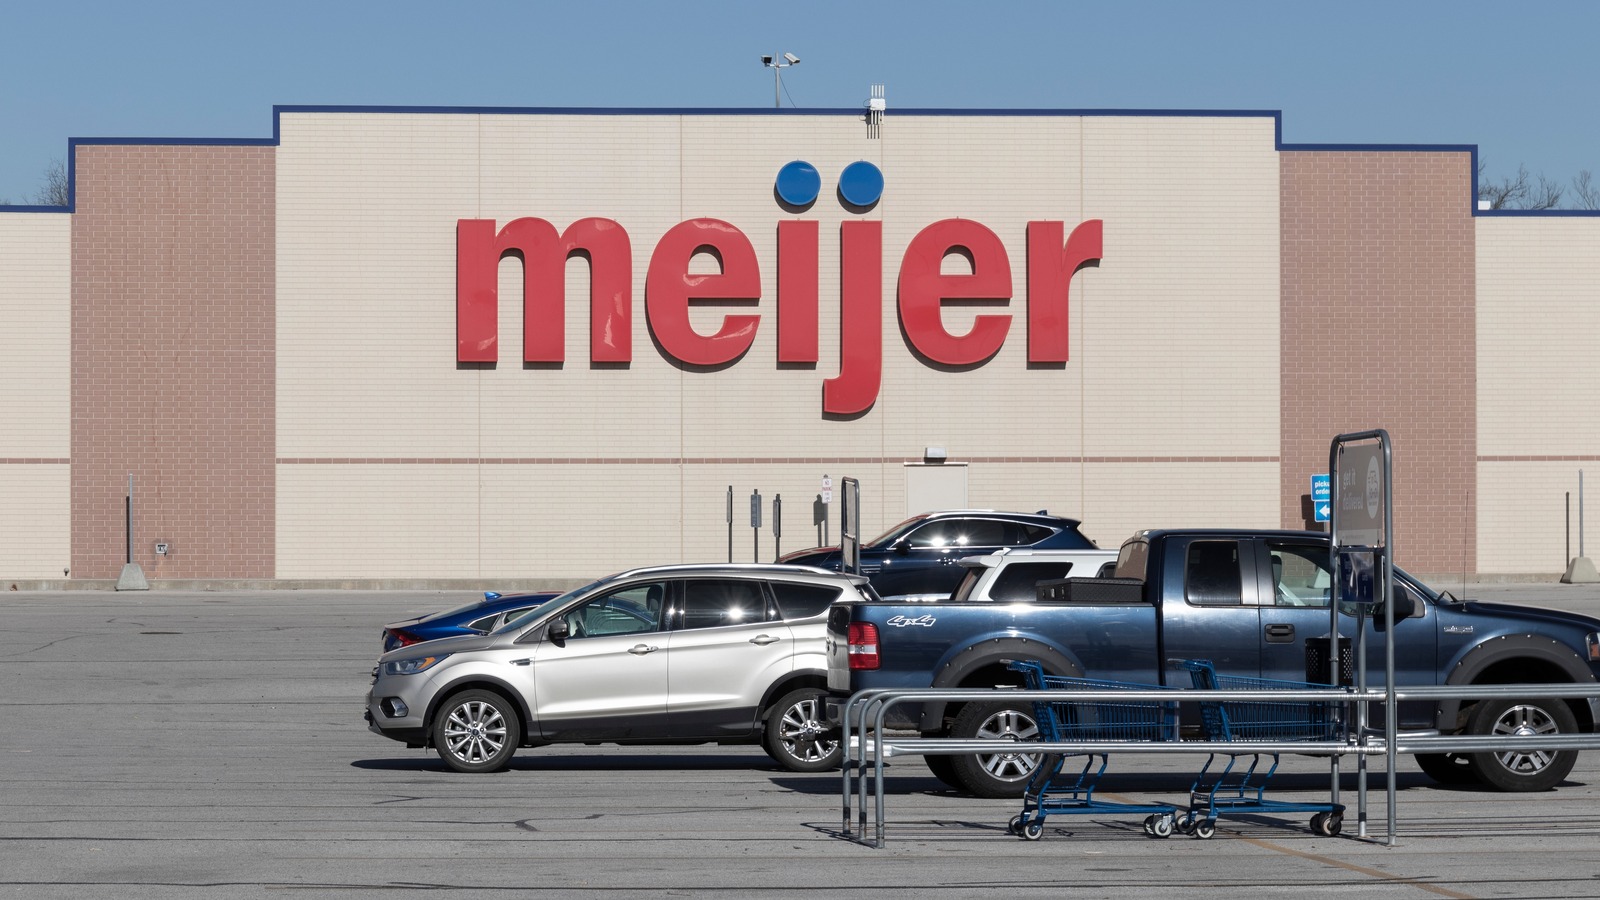 What Sets New Meijer's Stores Apart From The Regular Meijer's